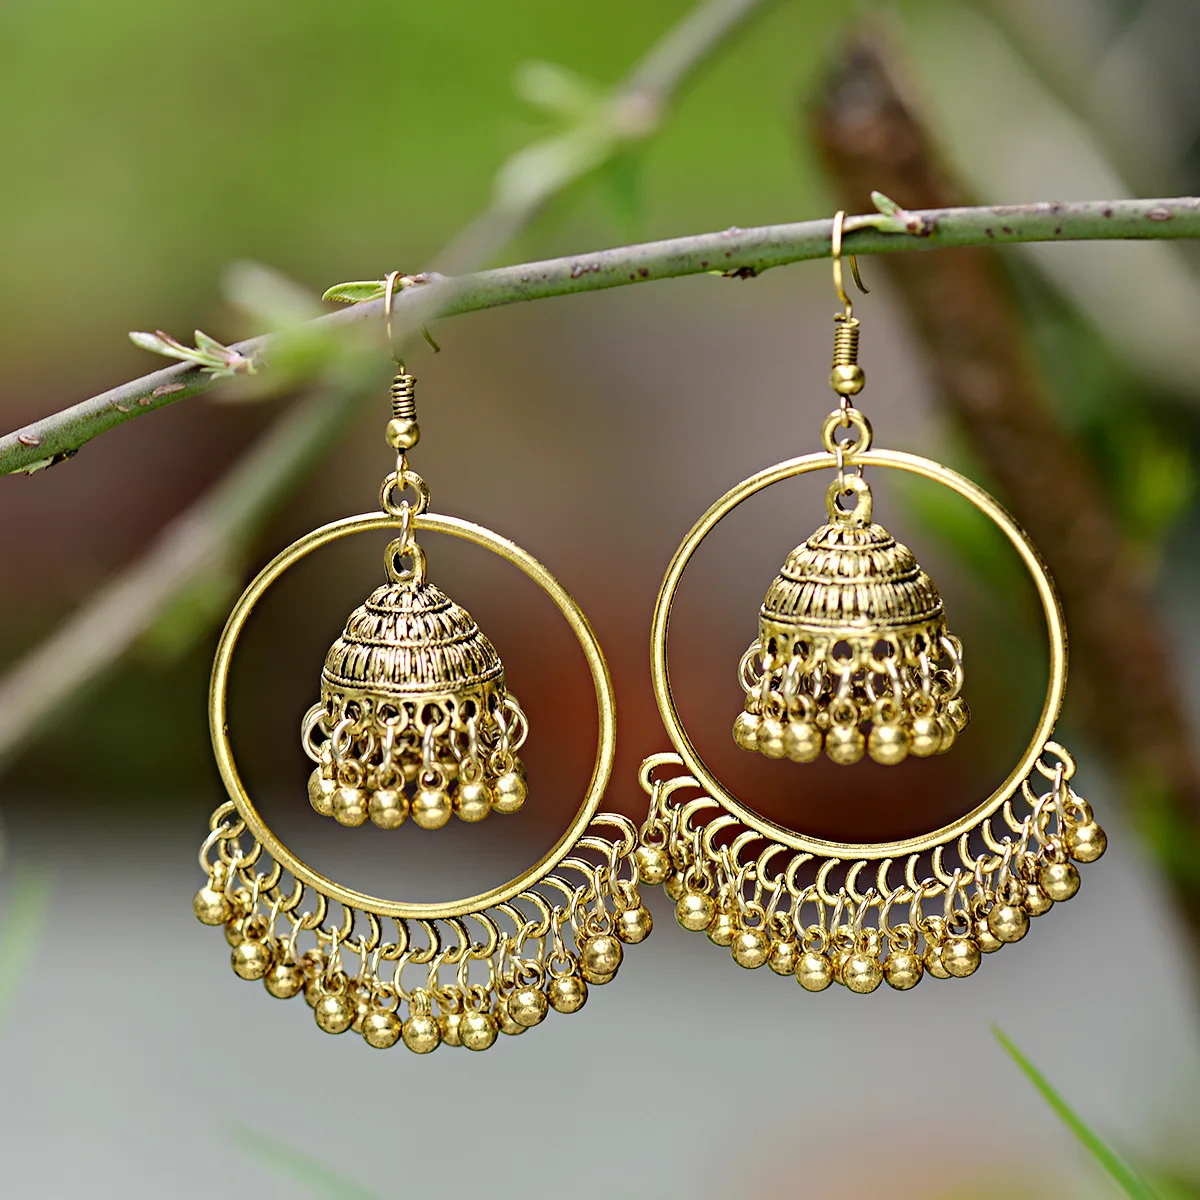 Oreleaa Earrings Oxidized Gold Jhumki in Pearl Beaded and Hollow Carved Metal For Women and Girls